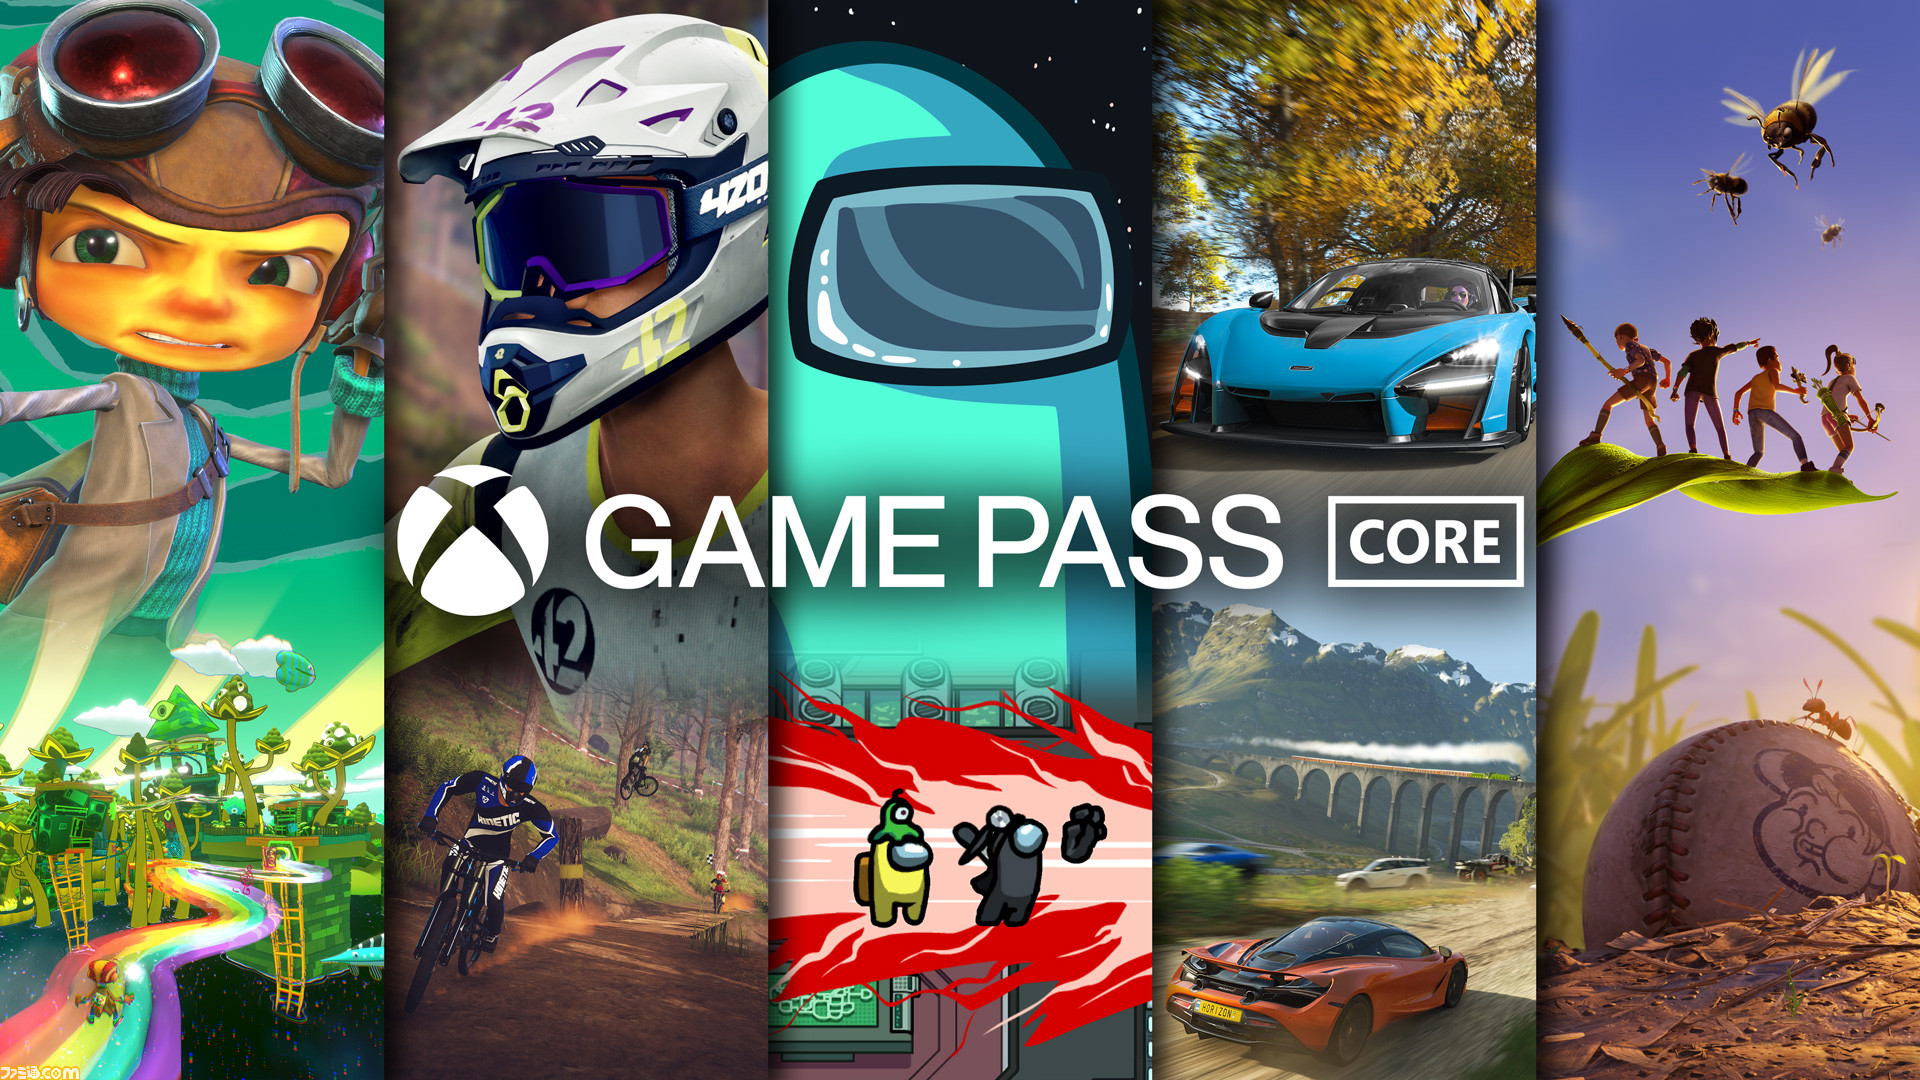 Xbox Game Pass Core, an upgraded version of Xbox Live Gold, will be available starting September 14th.  Play Forza Horizon 4, Grounded, and more